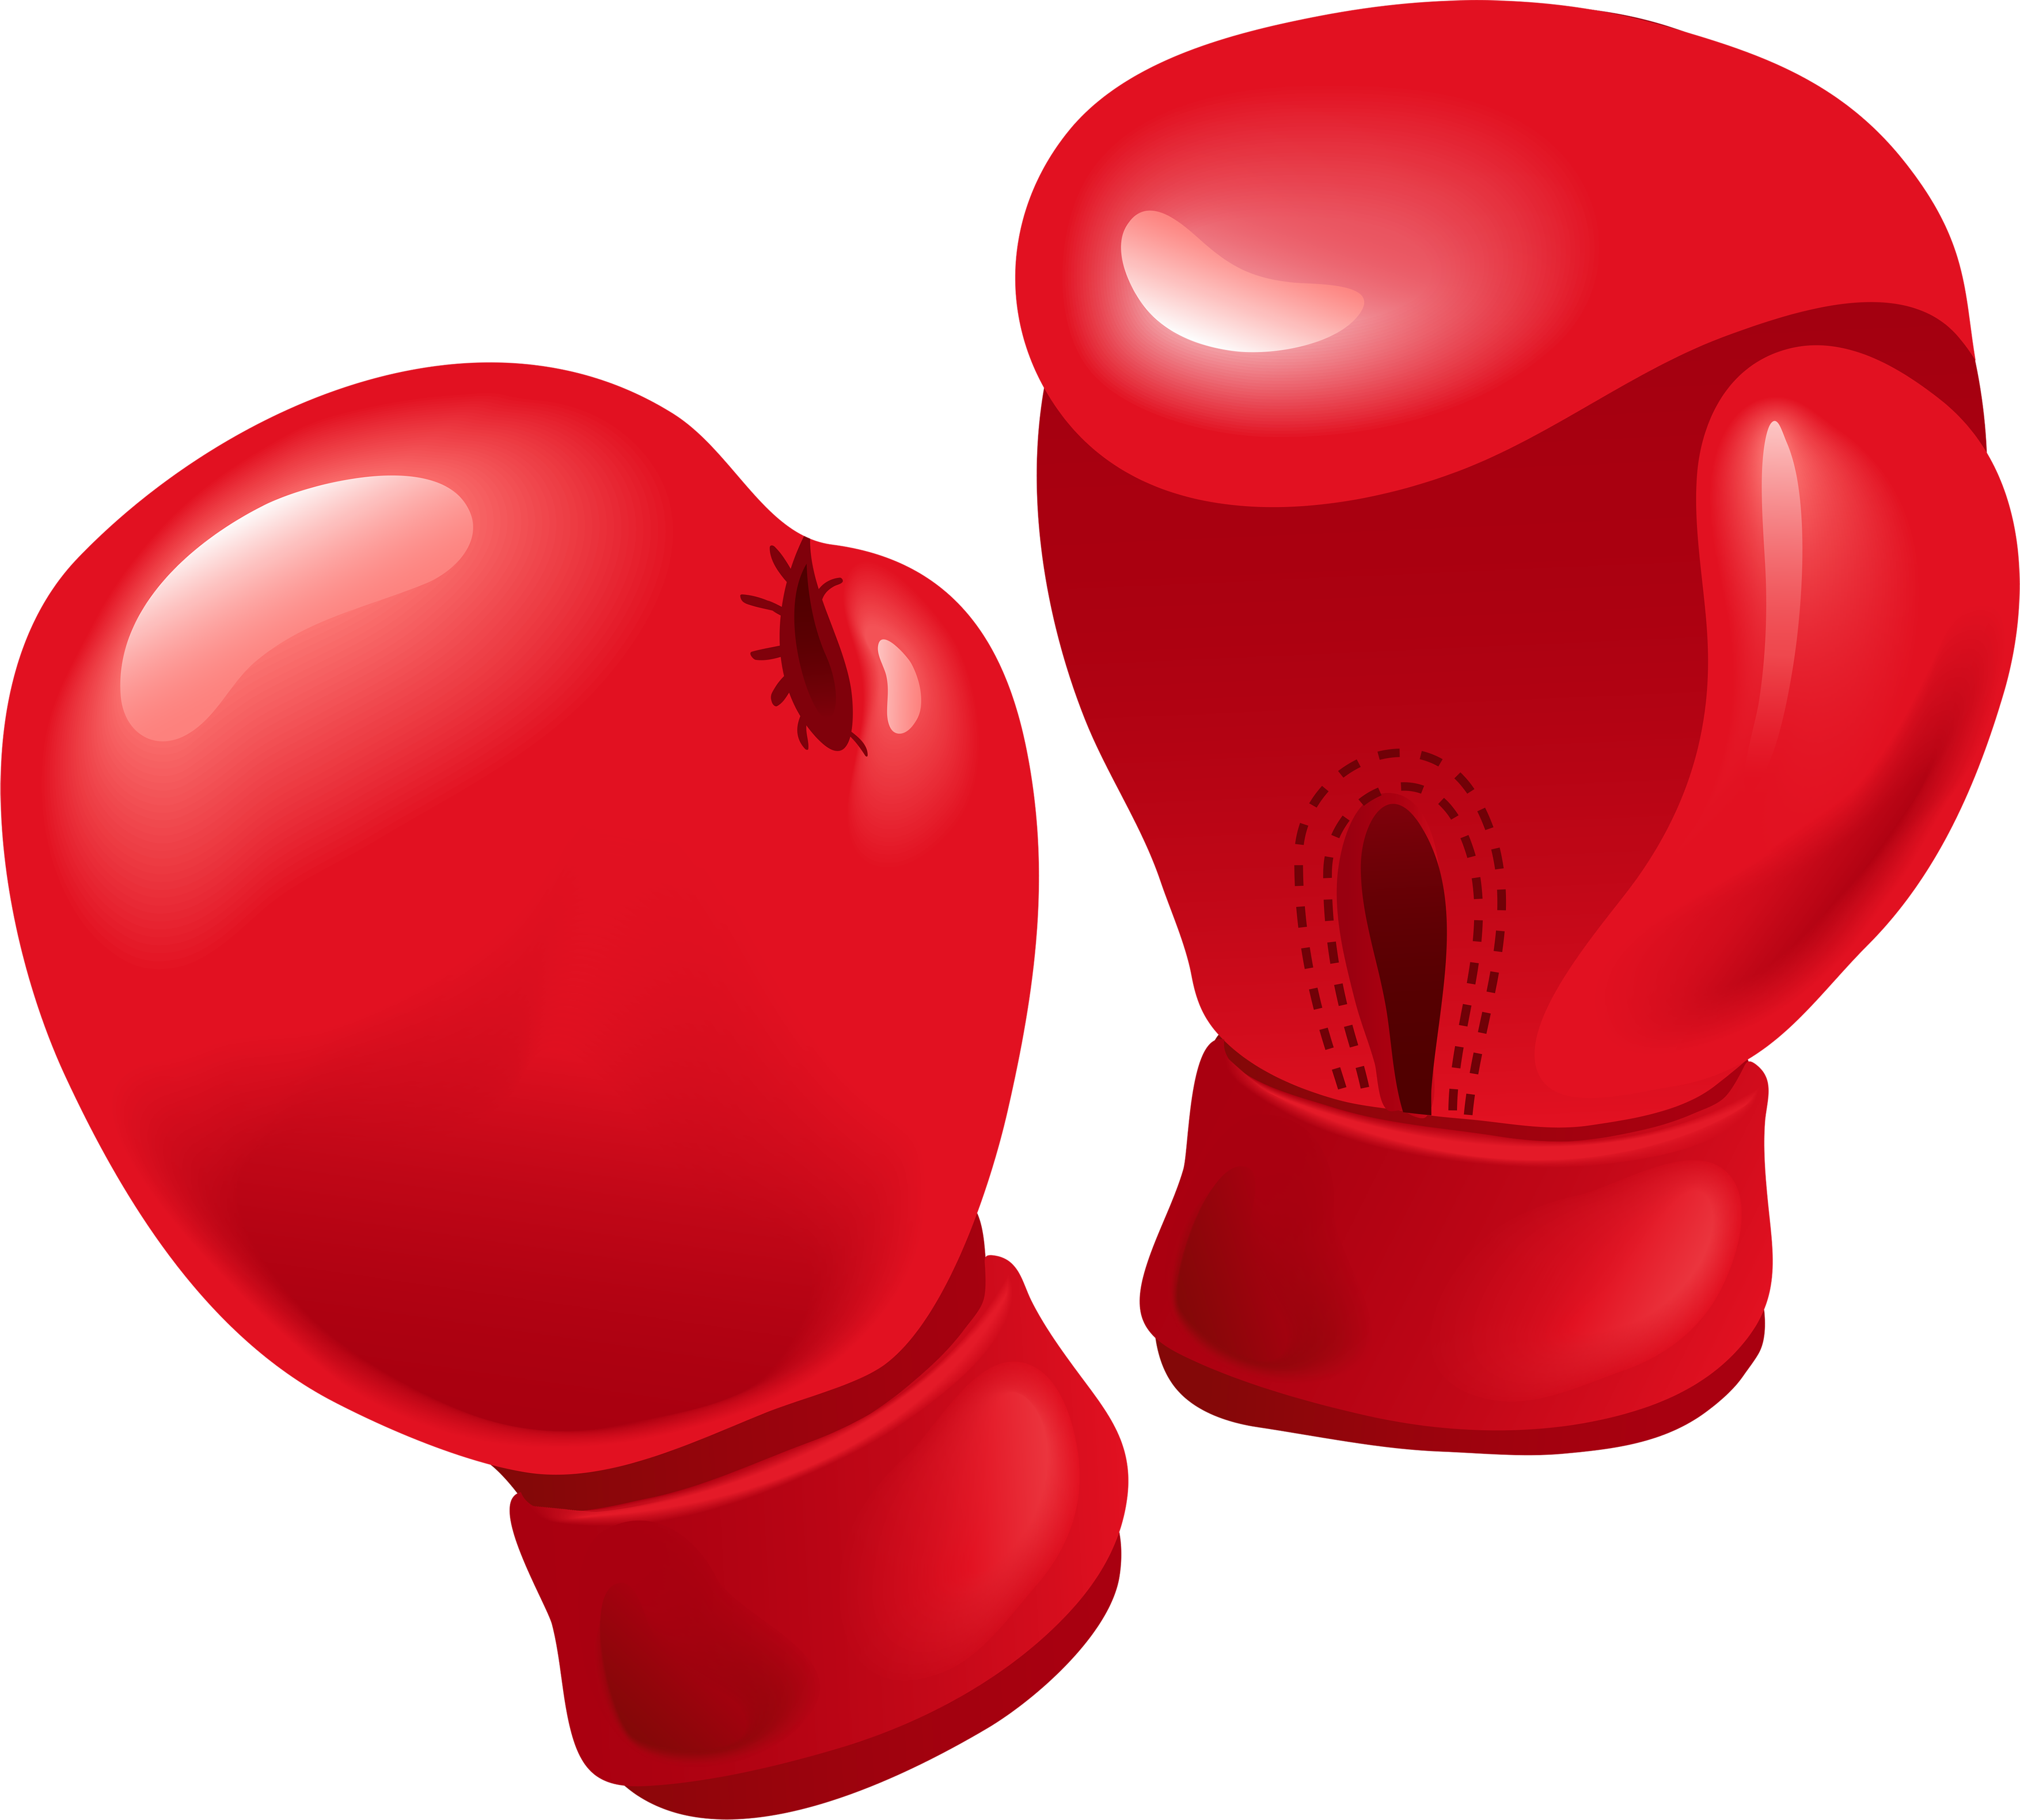 Boxing Gloves Clipart & Boxing Gloves Clip Art Images.